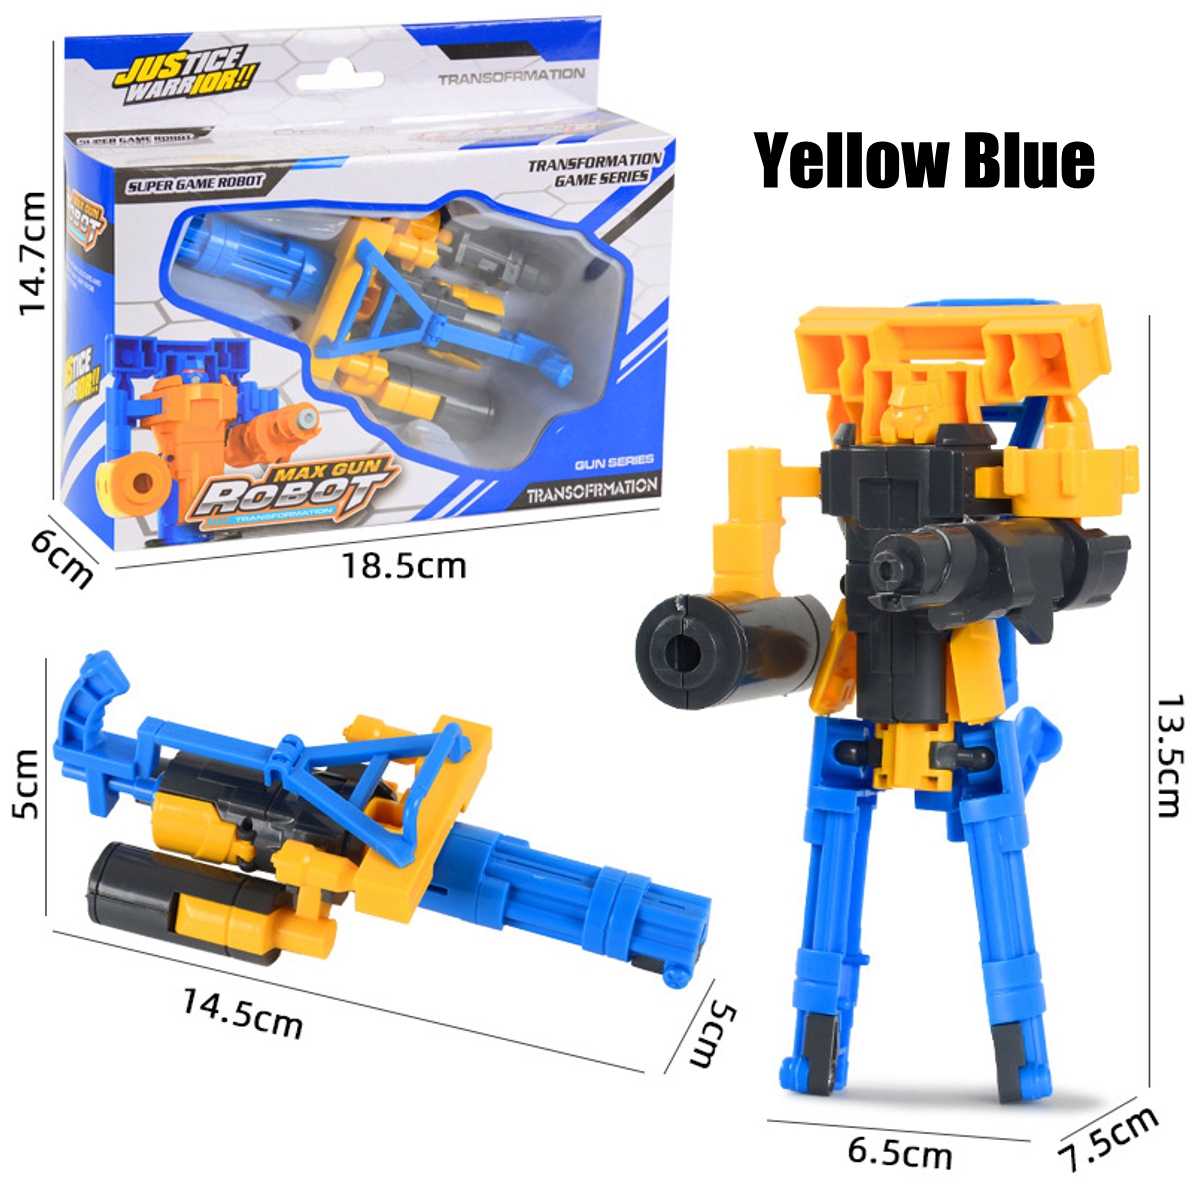 Children's Deformation Pistol Robot Toy Puzzle DIY Assembly Toy Christmas Gift